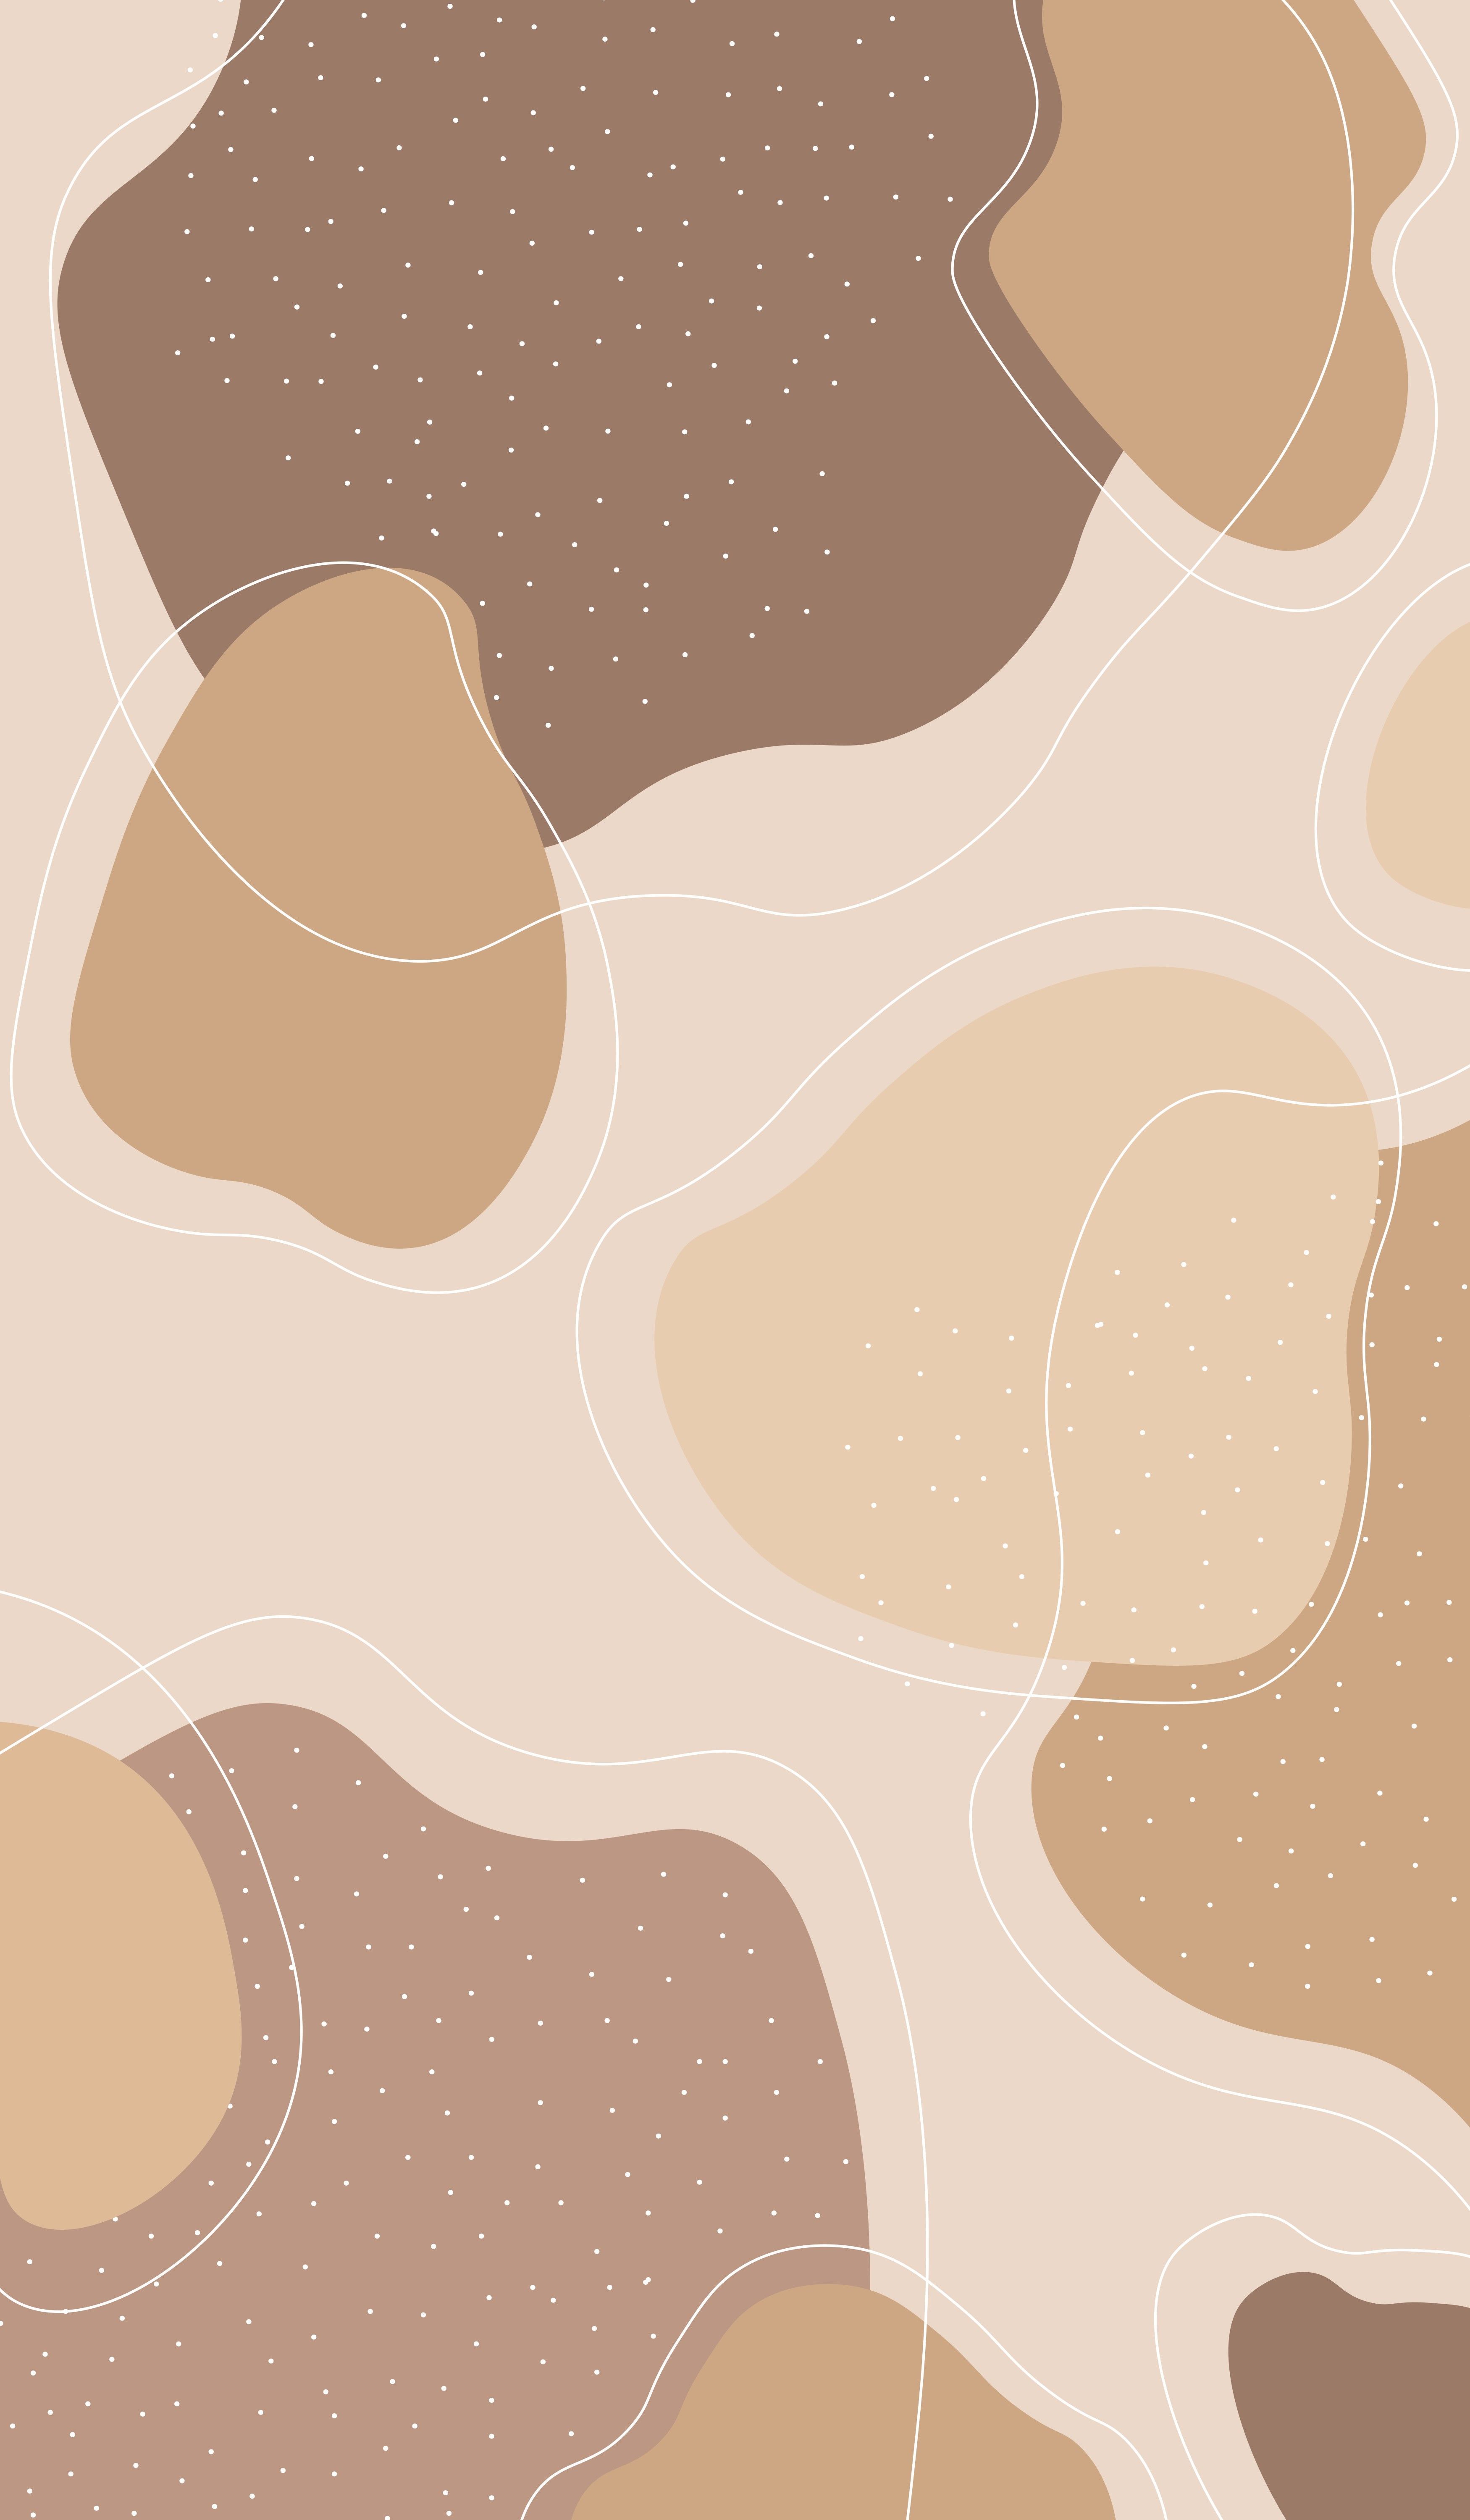 A pattern of brown and beige shapes - Abstract